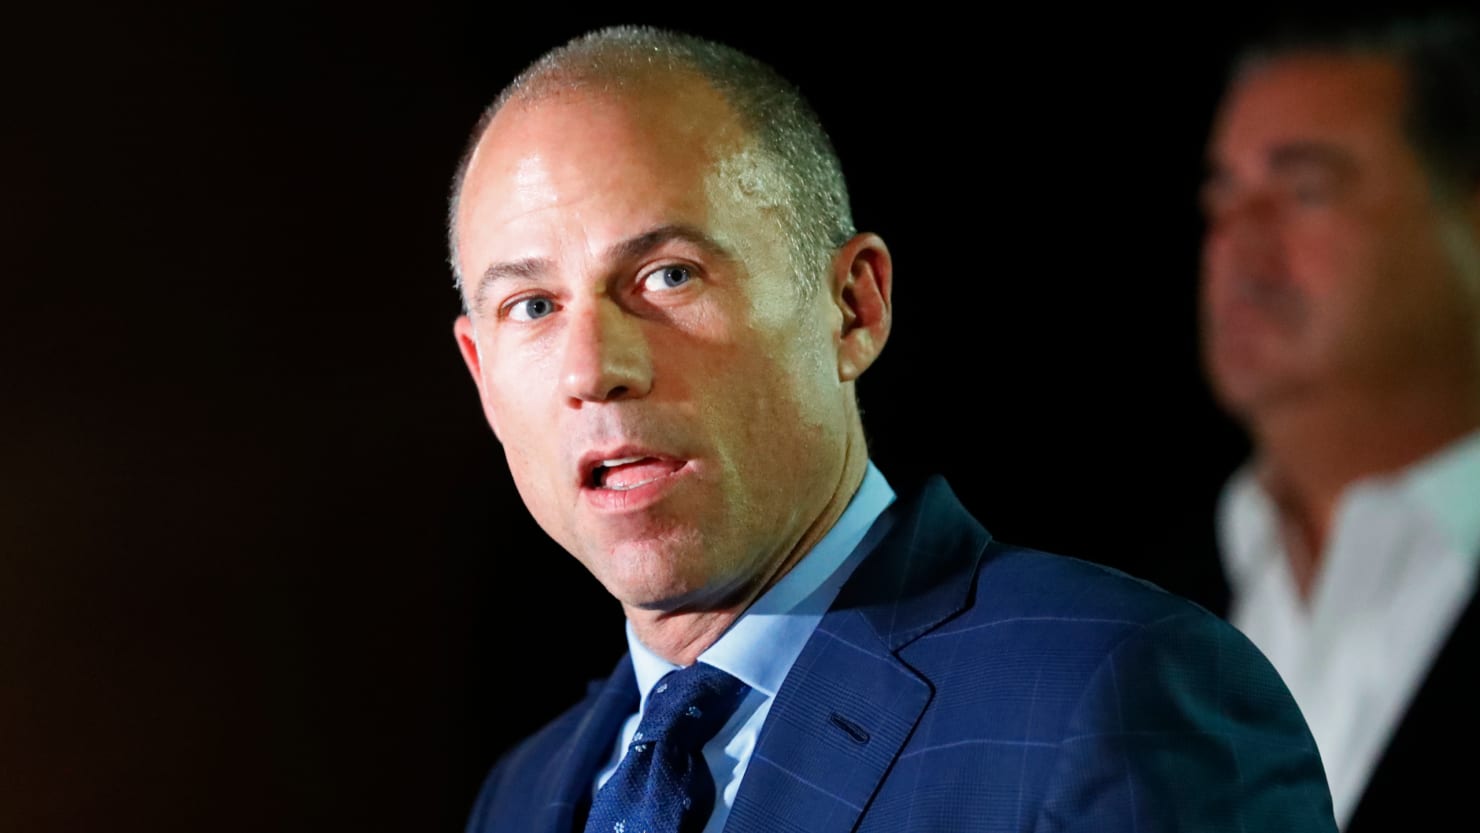 Michael Avenatti Law Firm Files for Bankruptcy—Again